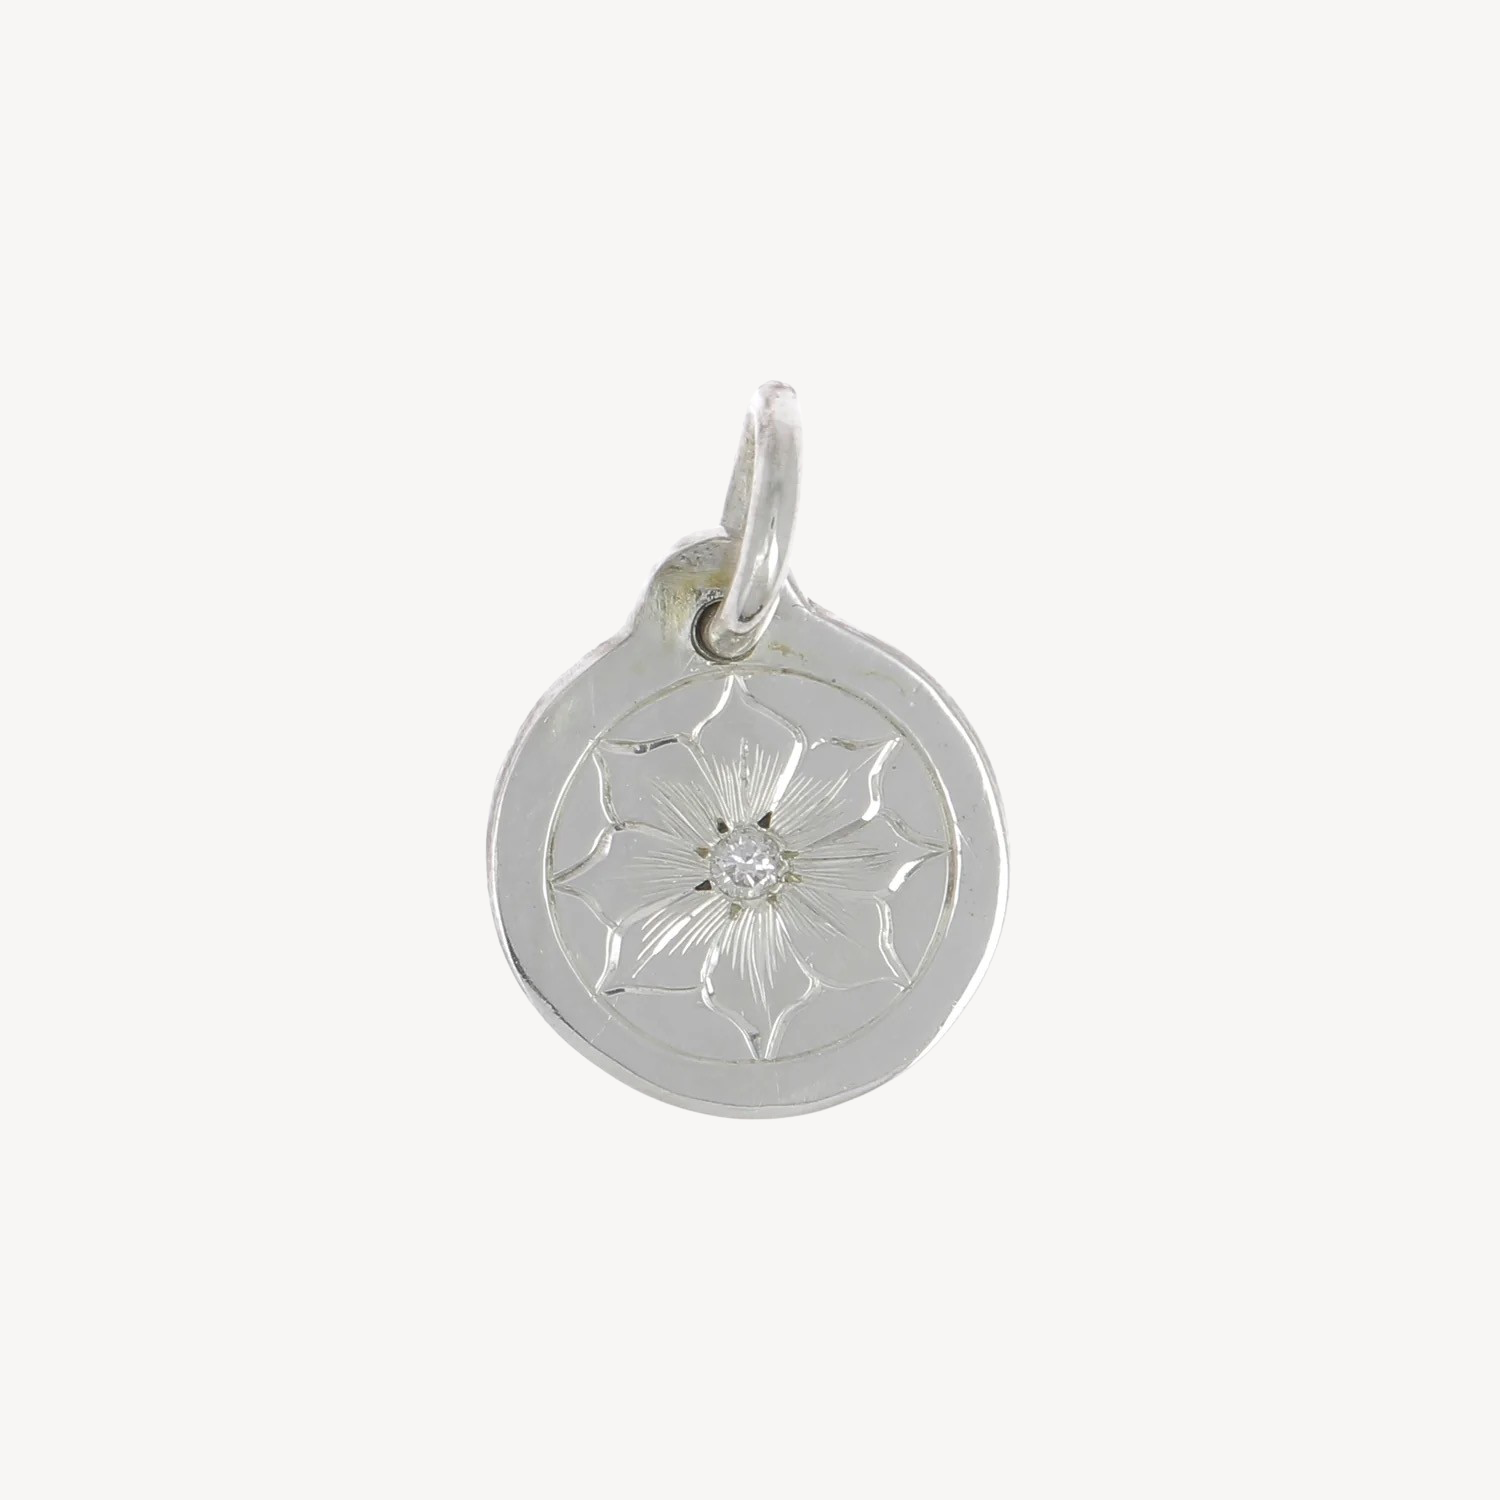 Bloom silver and diamond charm